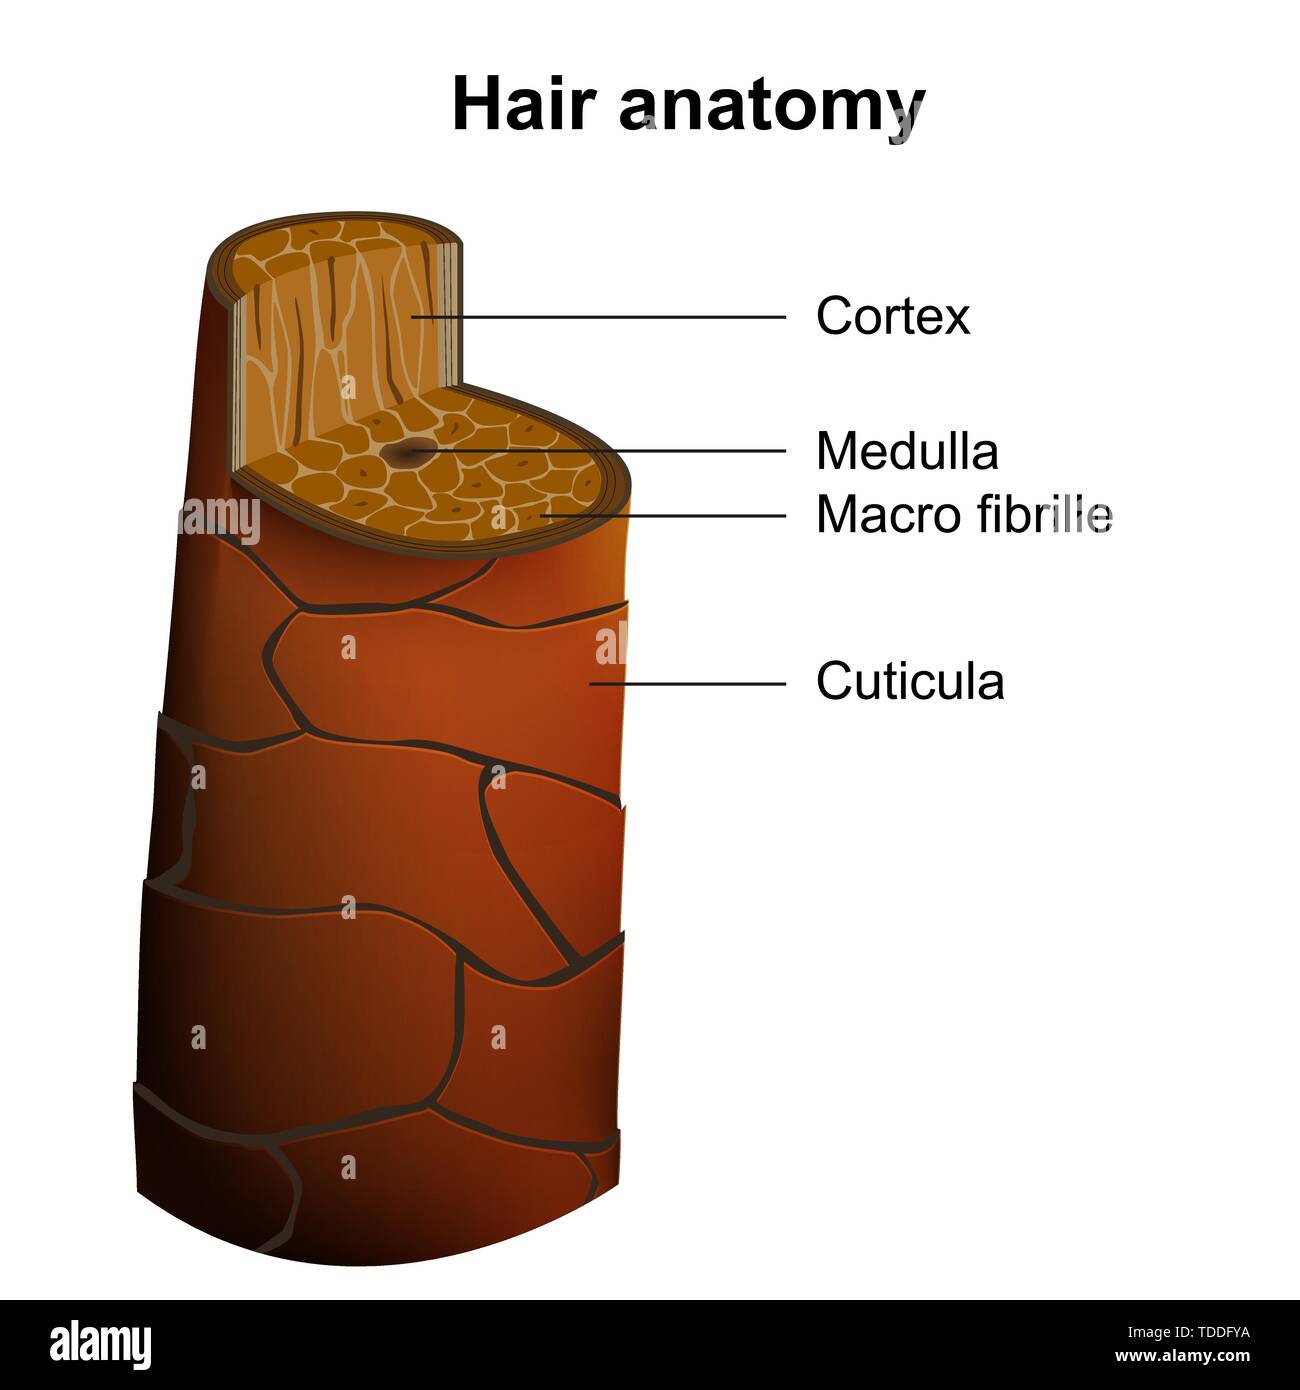 human hair anatomy medical vector illustration isolated on white background Stock Vector